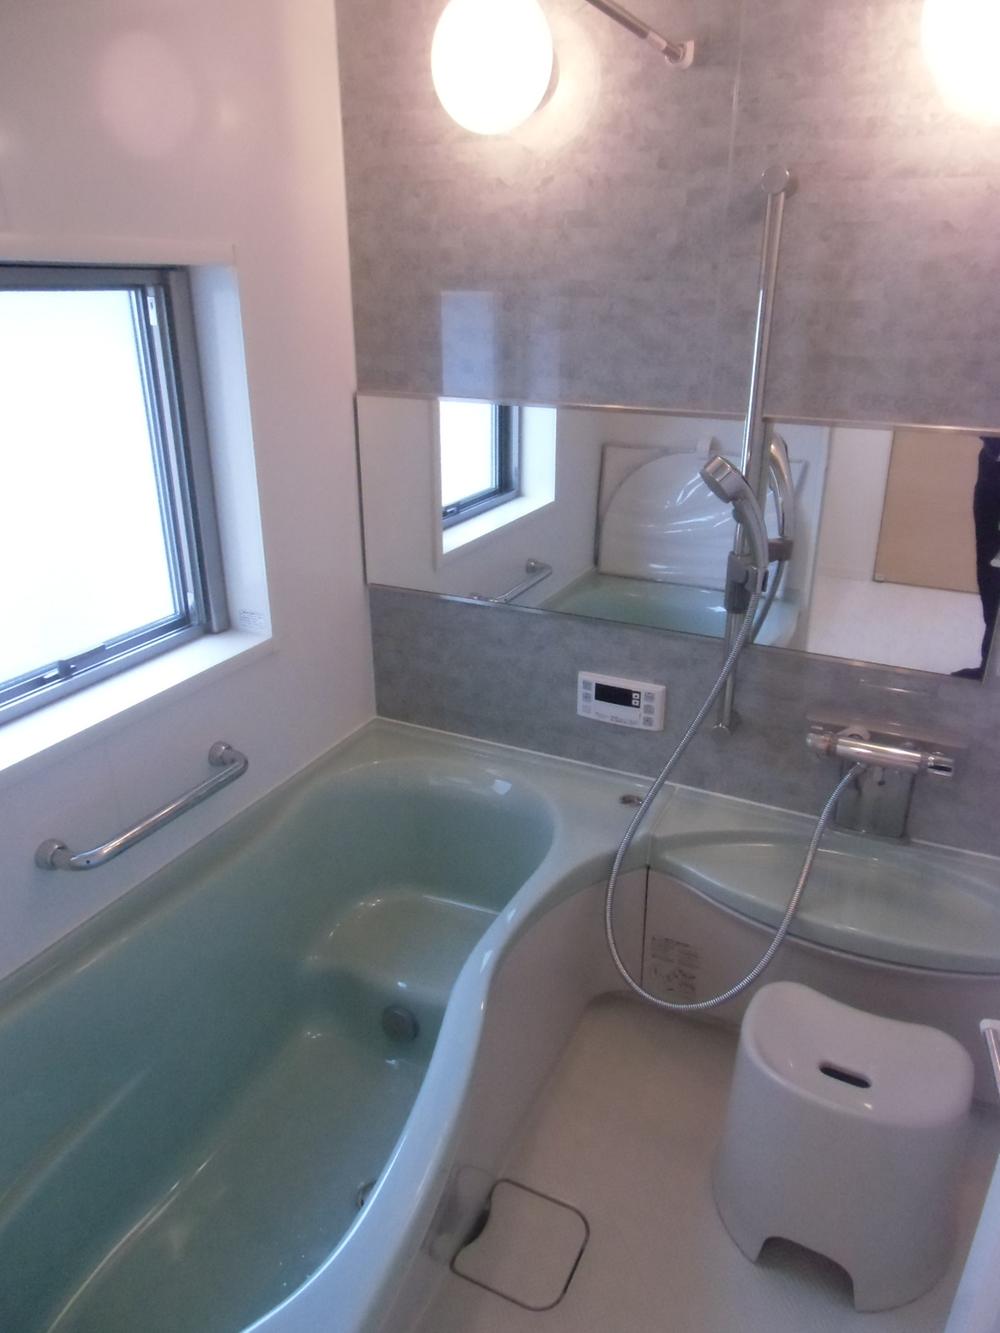 Bathroom. Unit bus of 1 pyeong type spacious! Comfortable bath so we also attached windows and bathroom ventilation dryer!